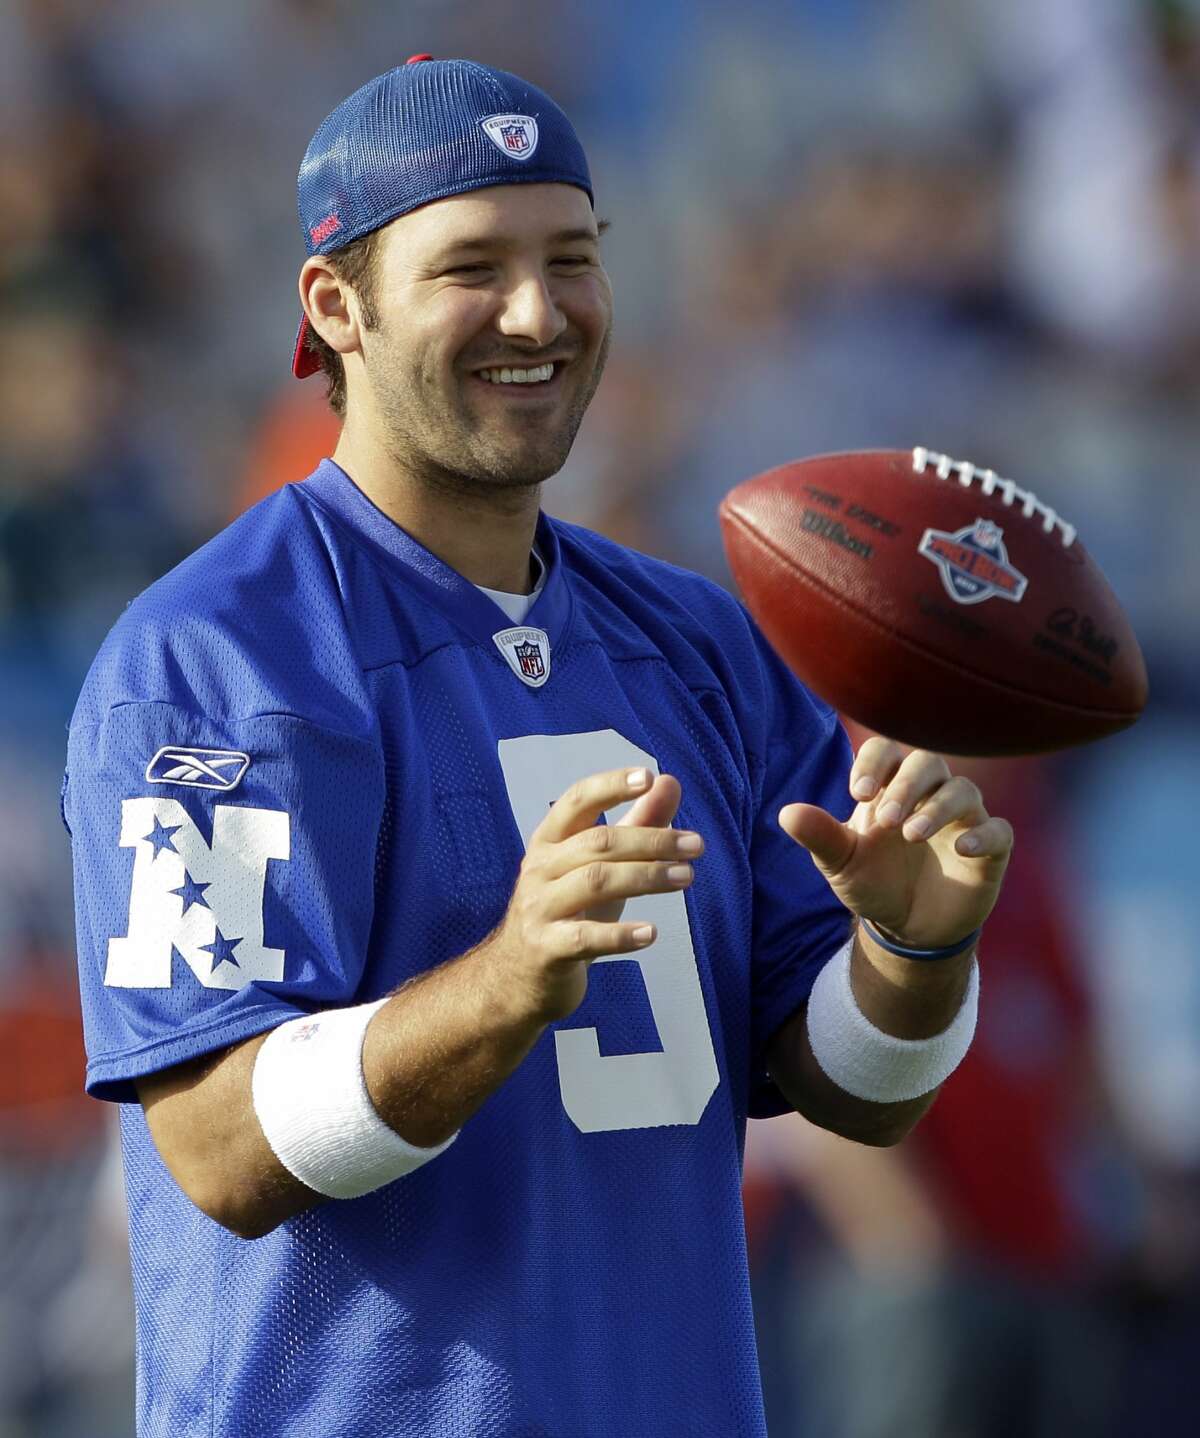 Dallas Cowboys quarterback Tony Romo catches a ball during a practice for the NFL football Pro Bowl Saturday, Jan. 30, 2010, in Fort Lauderdale, Fla. (AP Photo/David J. Phillip)